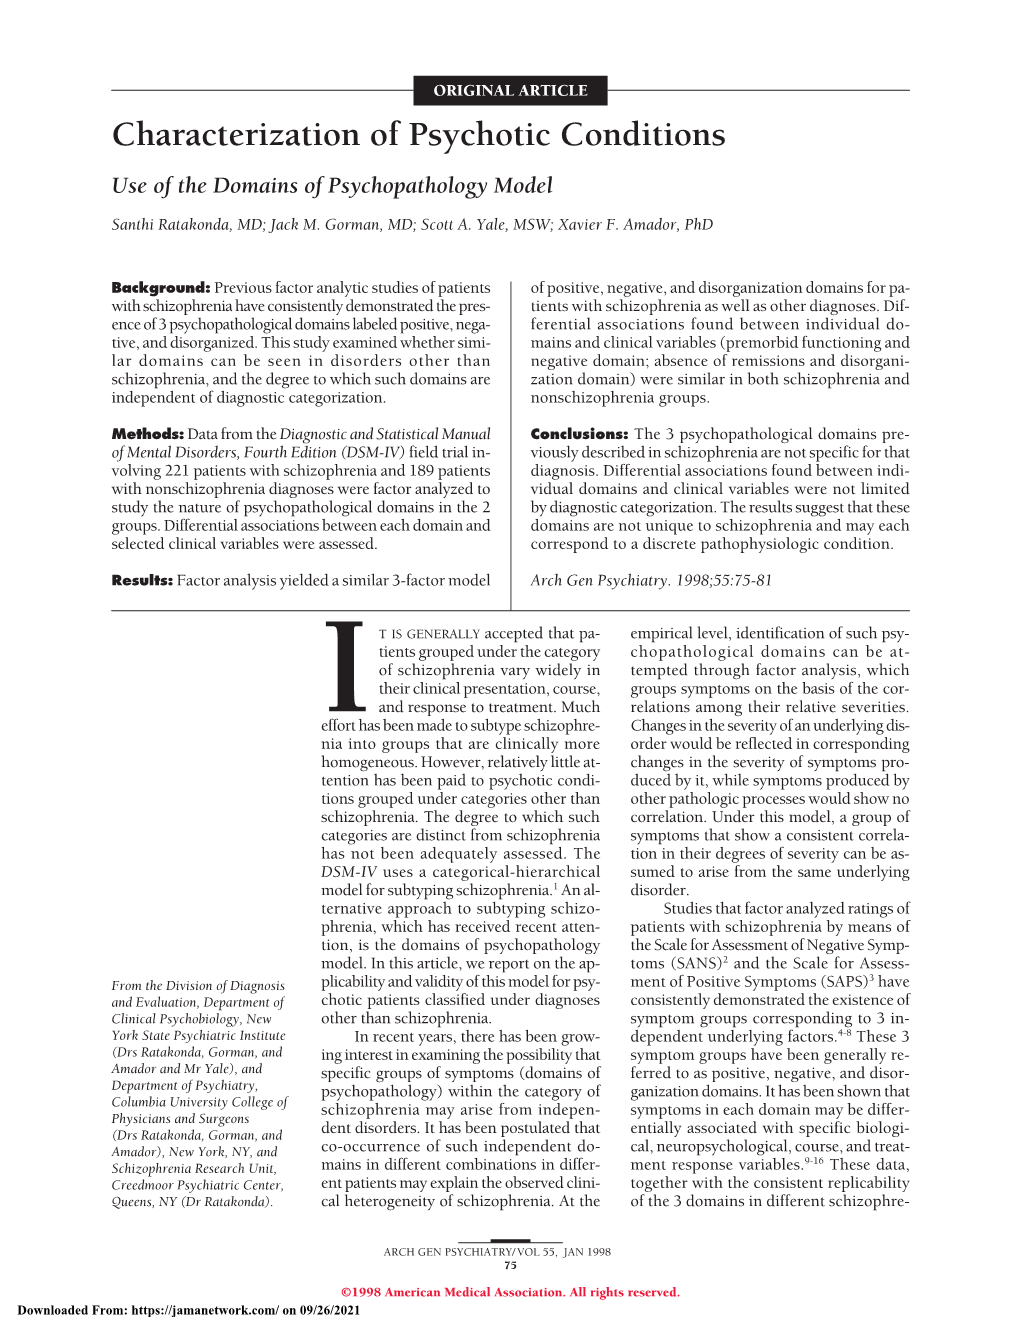 Characterization of Psychotic Conditions: Use of the Domains Of